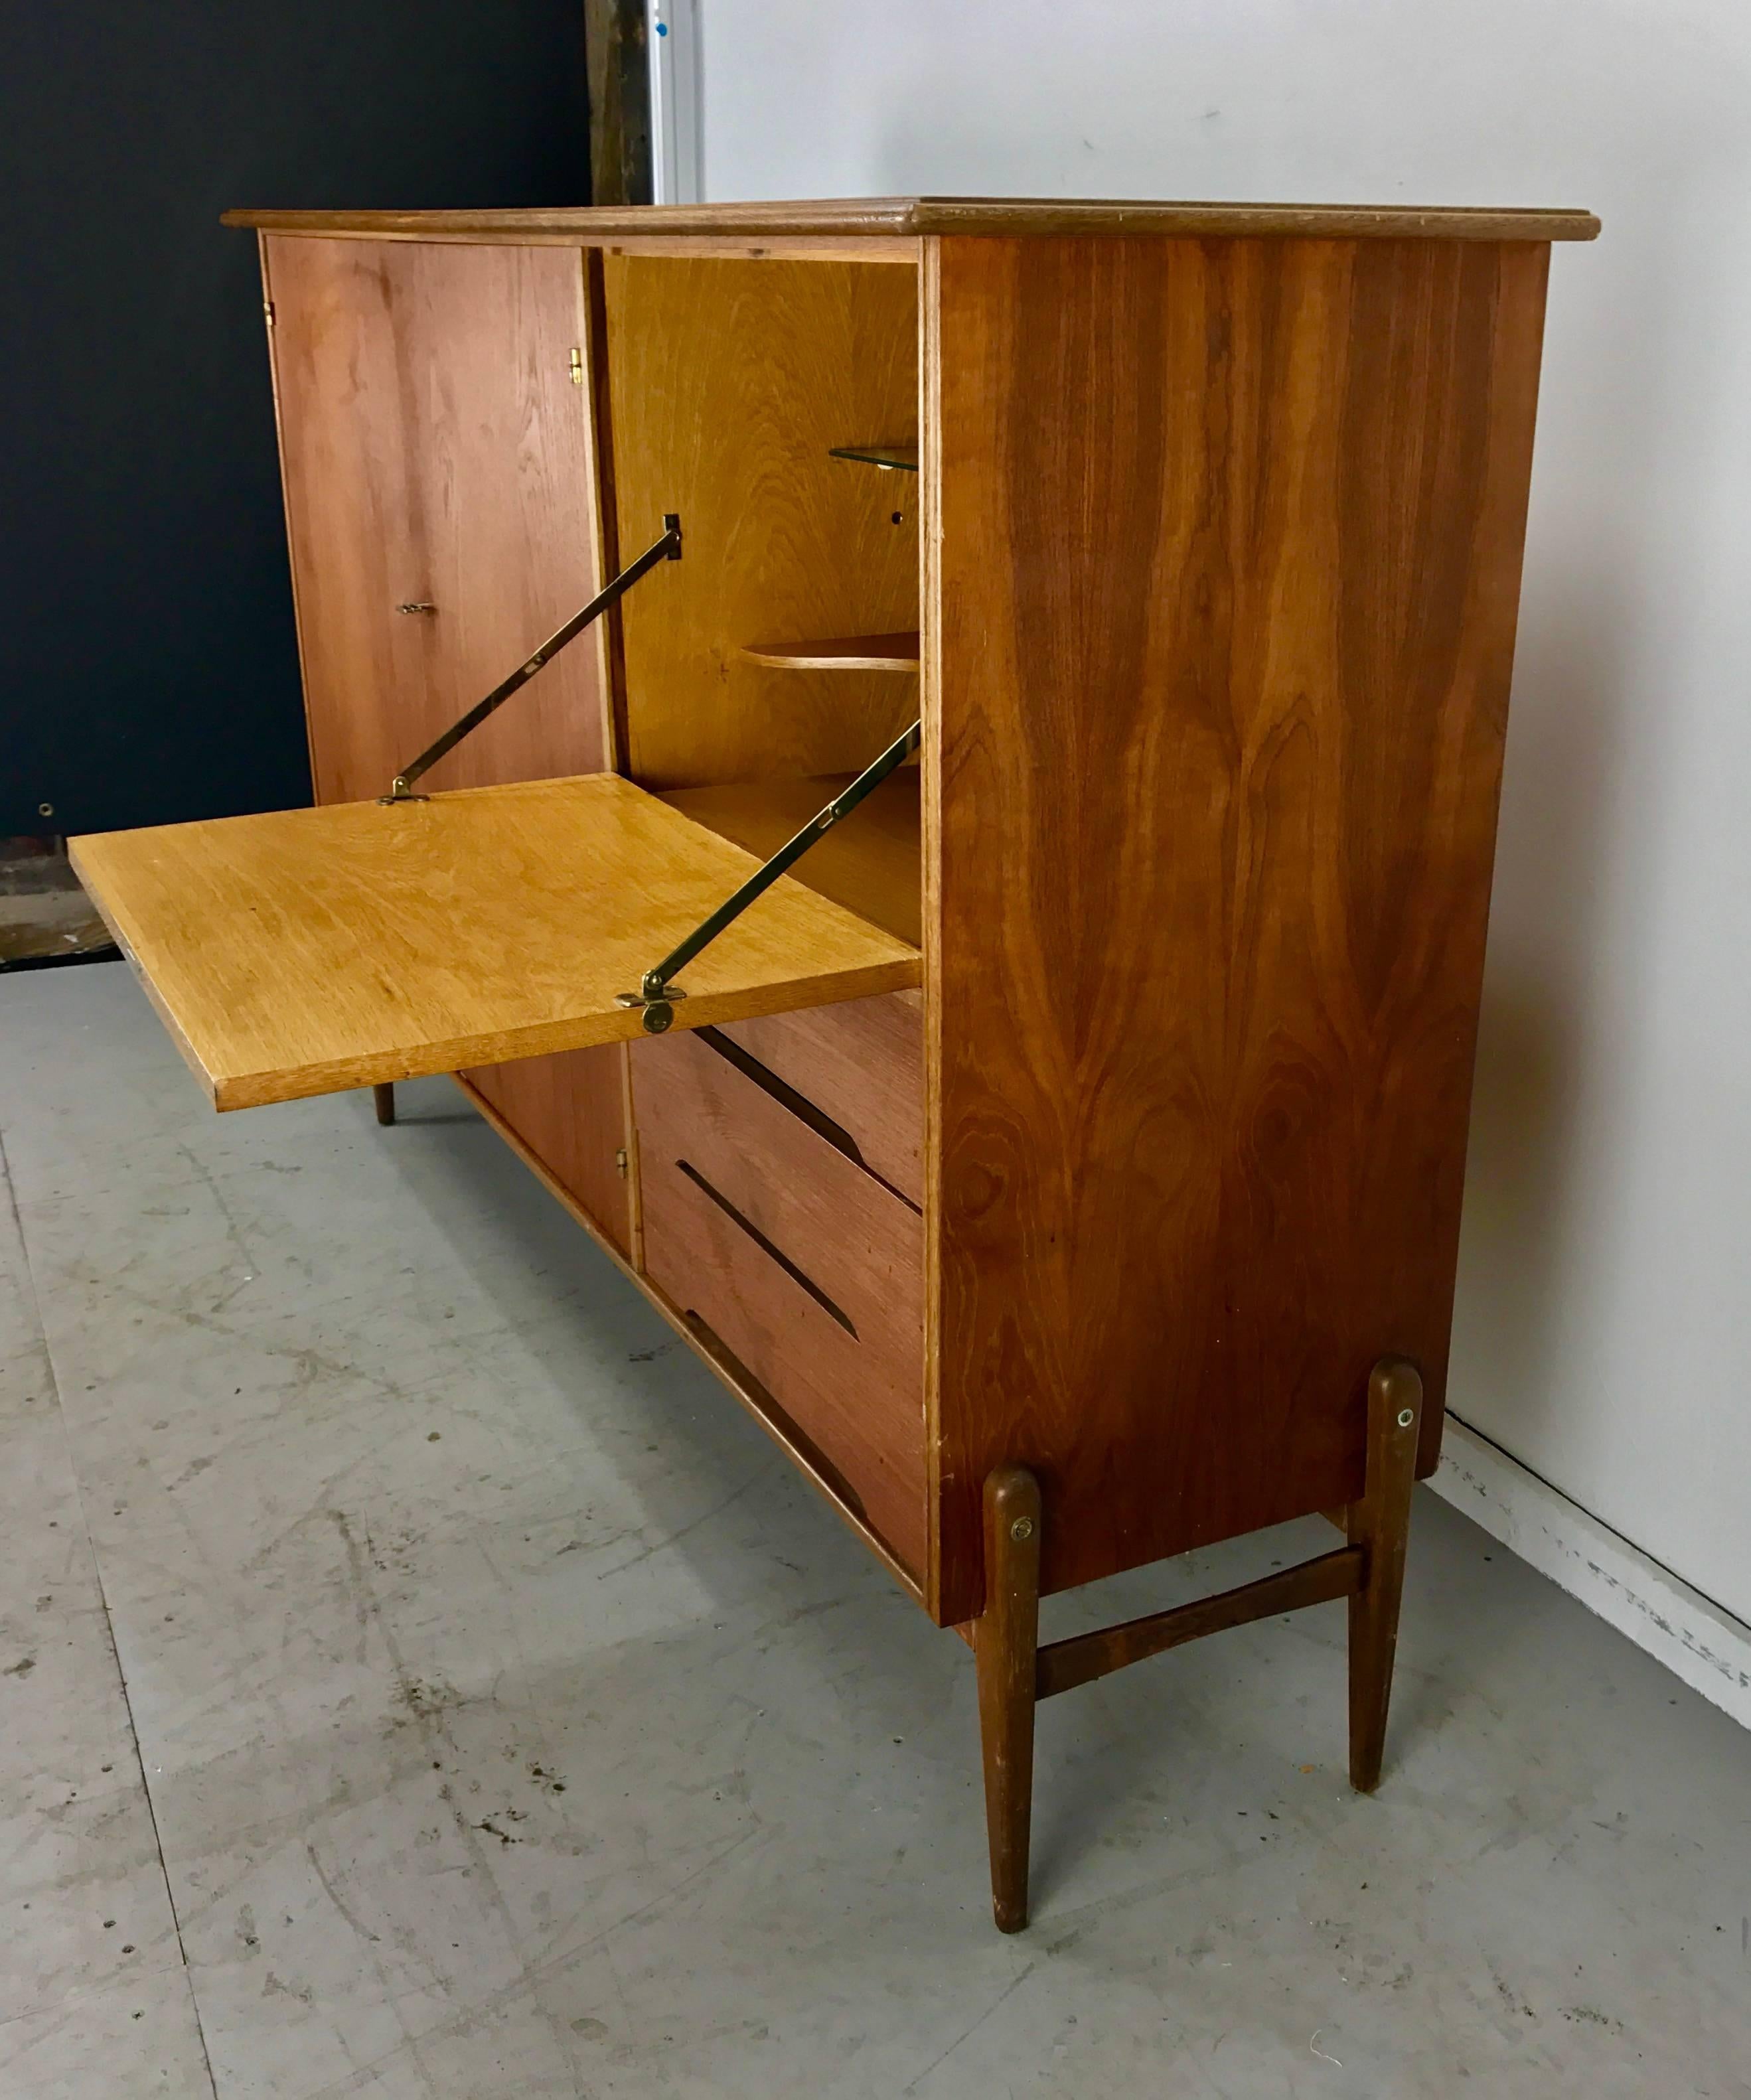 Stunning oak and teak cabinet/bar, early production made in Denmark, superior quality, dove-tail joinery, locking, featuring generous two-door cabinet/three shelves, drop down door, glass and wood shelf with three drawers below, super sexy,